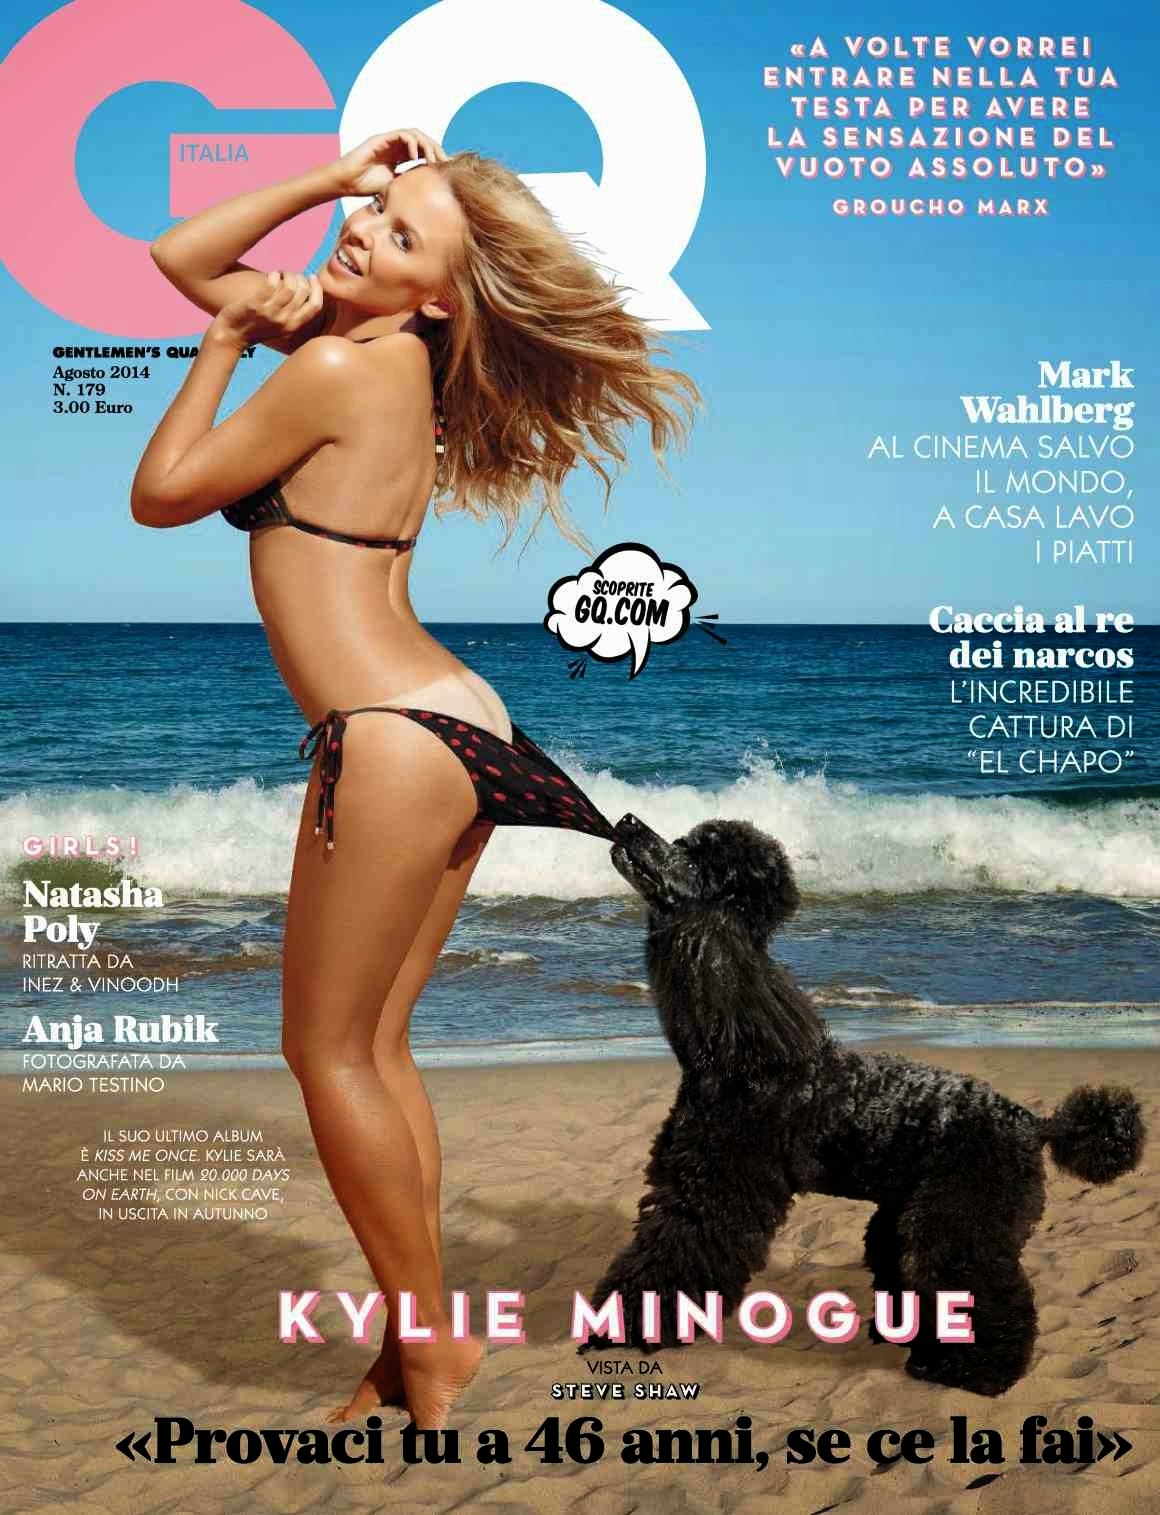 Kylie Minogue Stuns In A Tiny Bikini On The Cover Of 'GQ' Italy | ShineOnAndOn